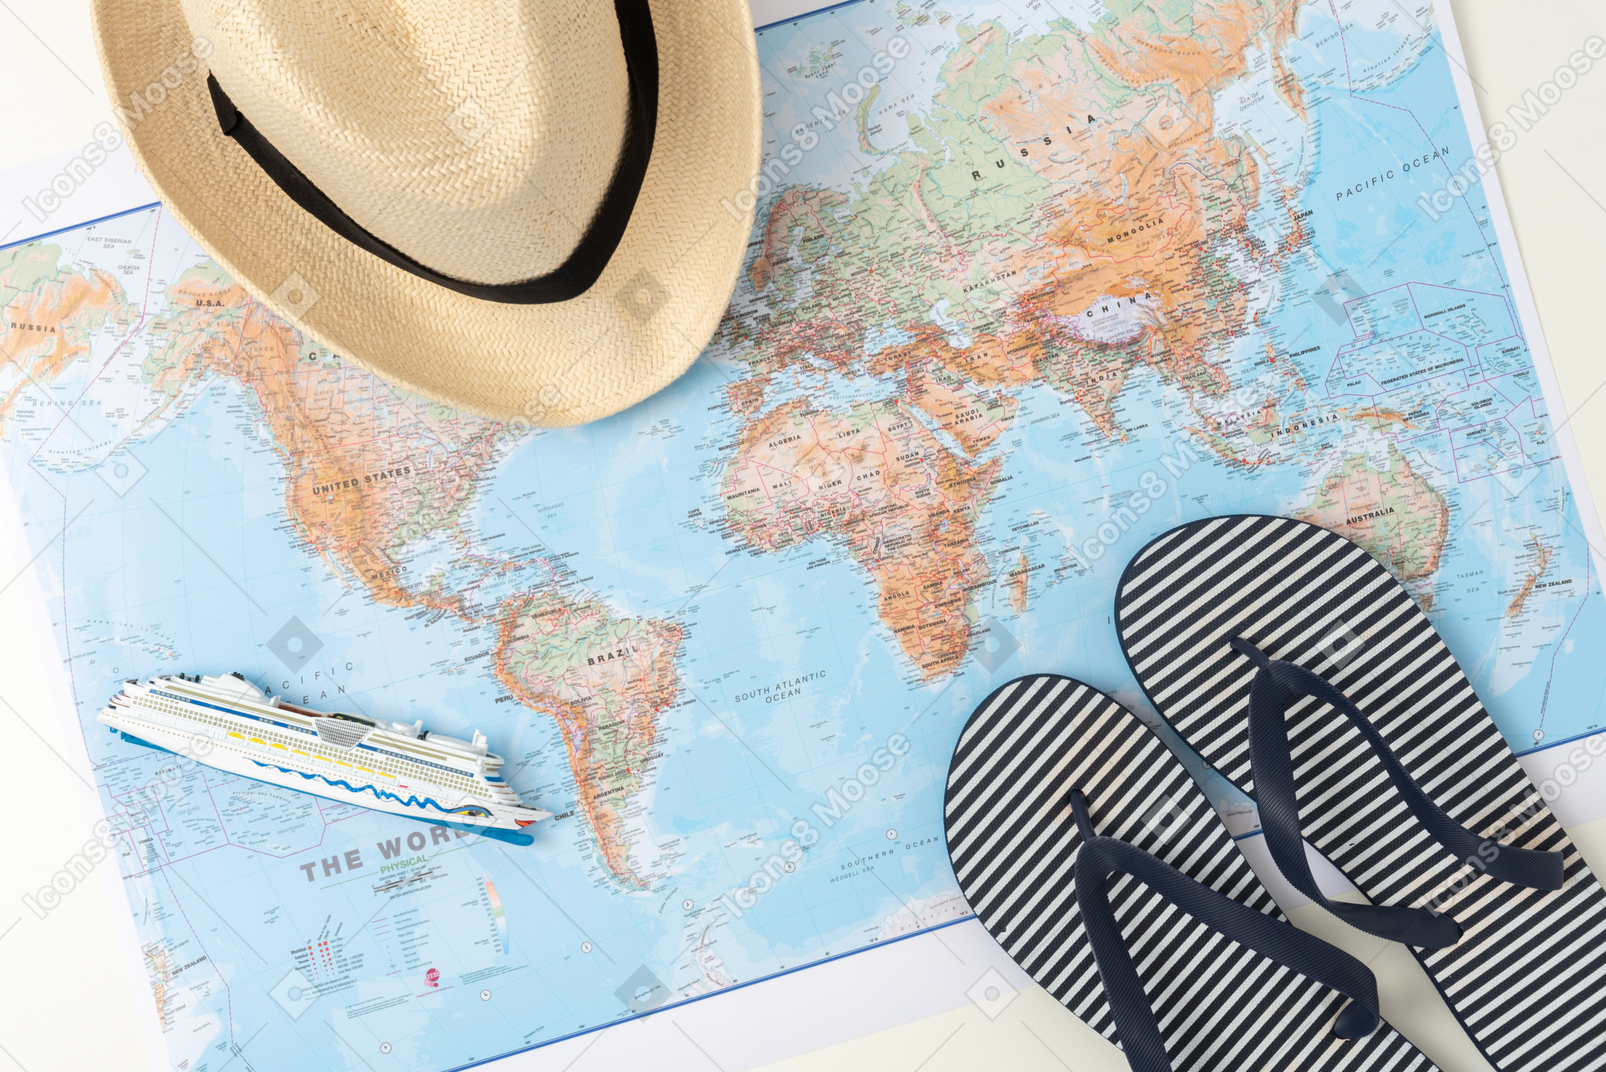 A straw hat, a map and flip-flops, aka every summer tourist's starter pack